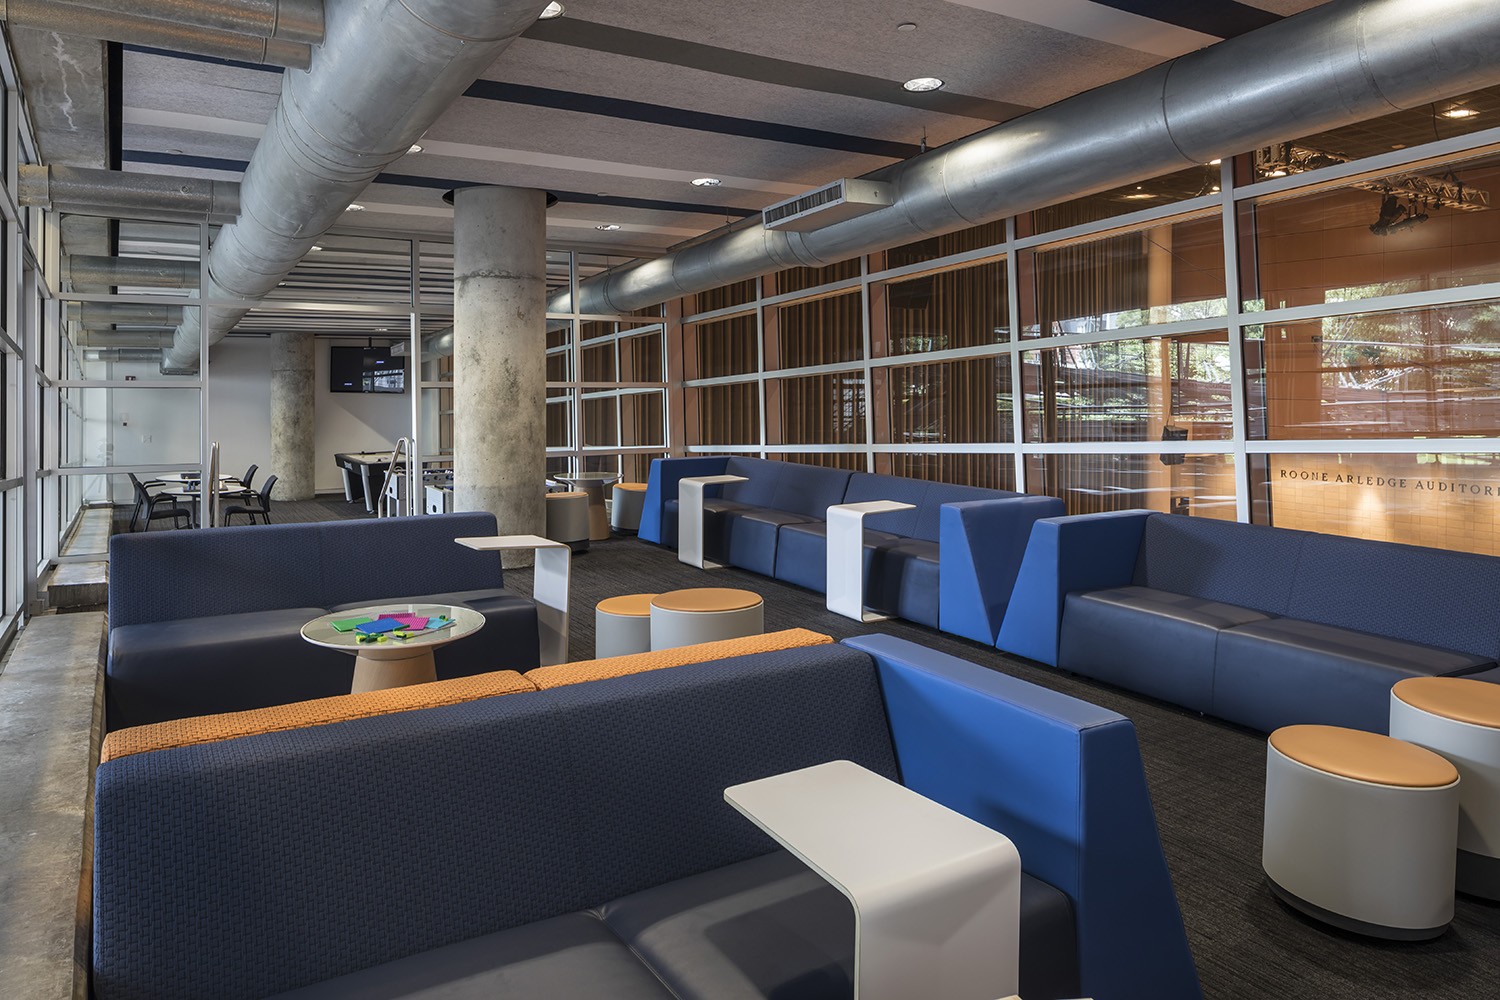 Lounge area with navy blue couches and small round stools. The lunge is divided by a partial glass wall with study tables in the other section.